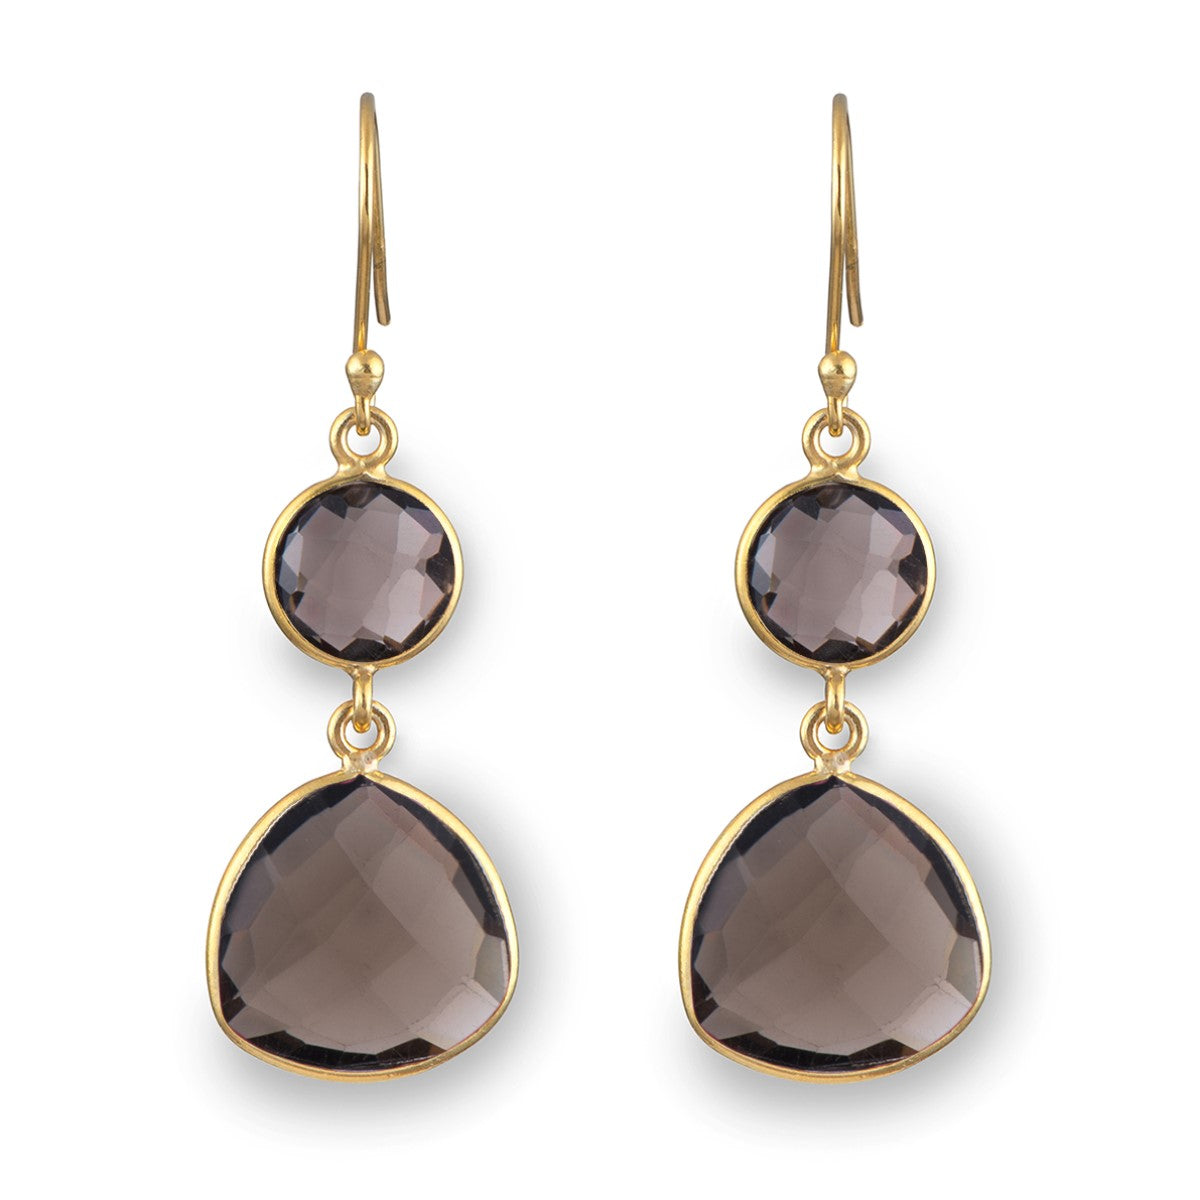 Smoky Quartz Gemstone Earrings in Gold Plated Sterling Silver - Triangular